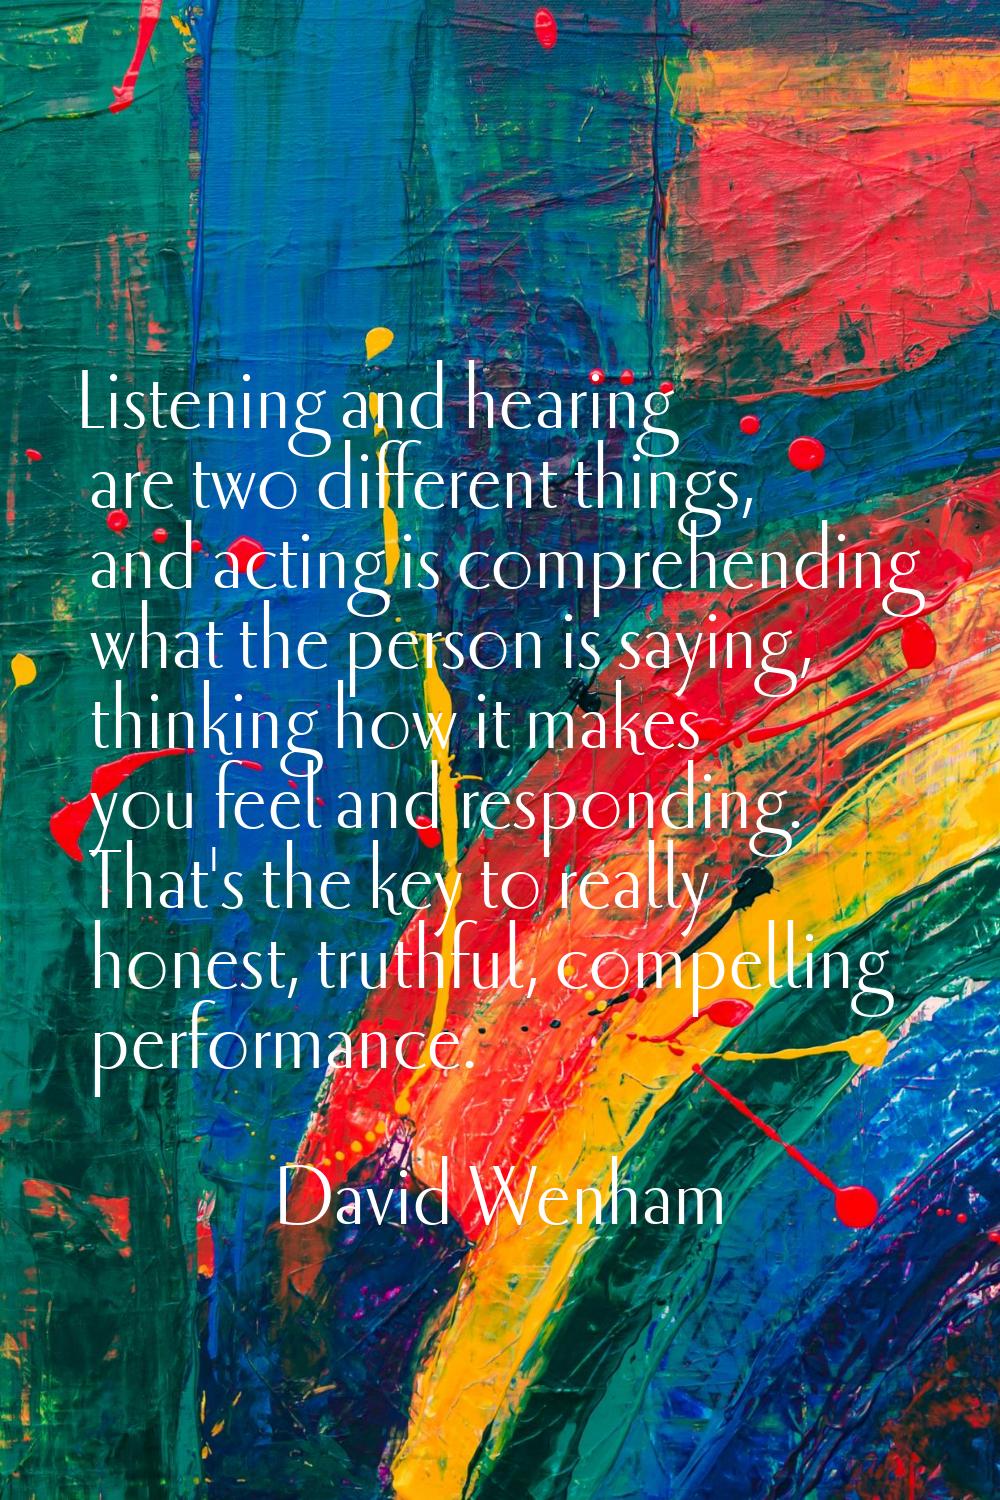 Listening and hearing are two different things, and acting is comprehending what the person is sayi